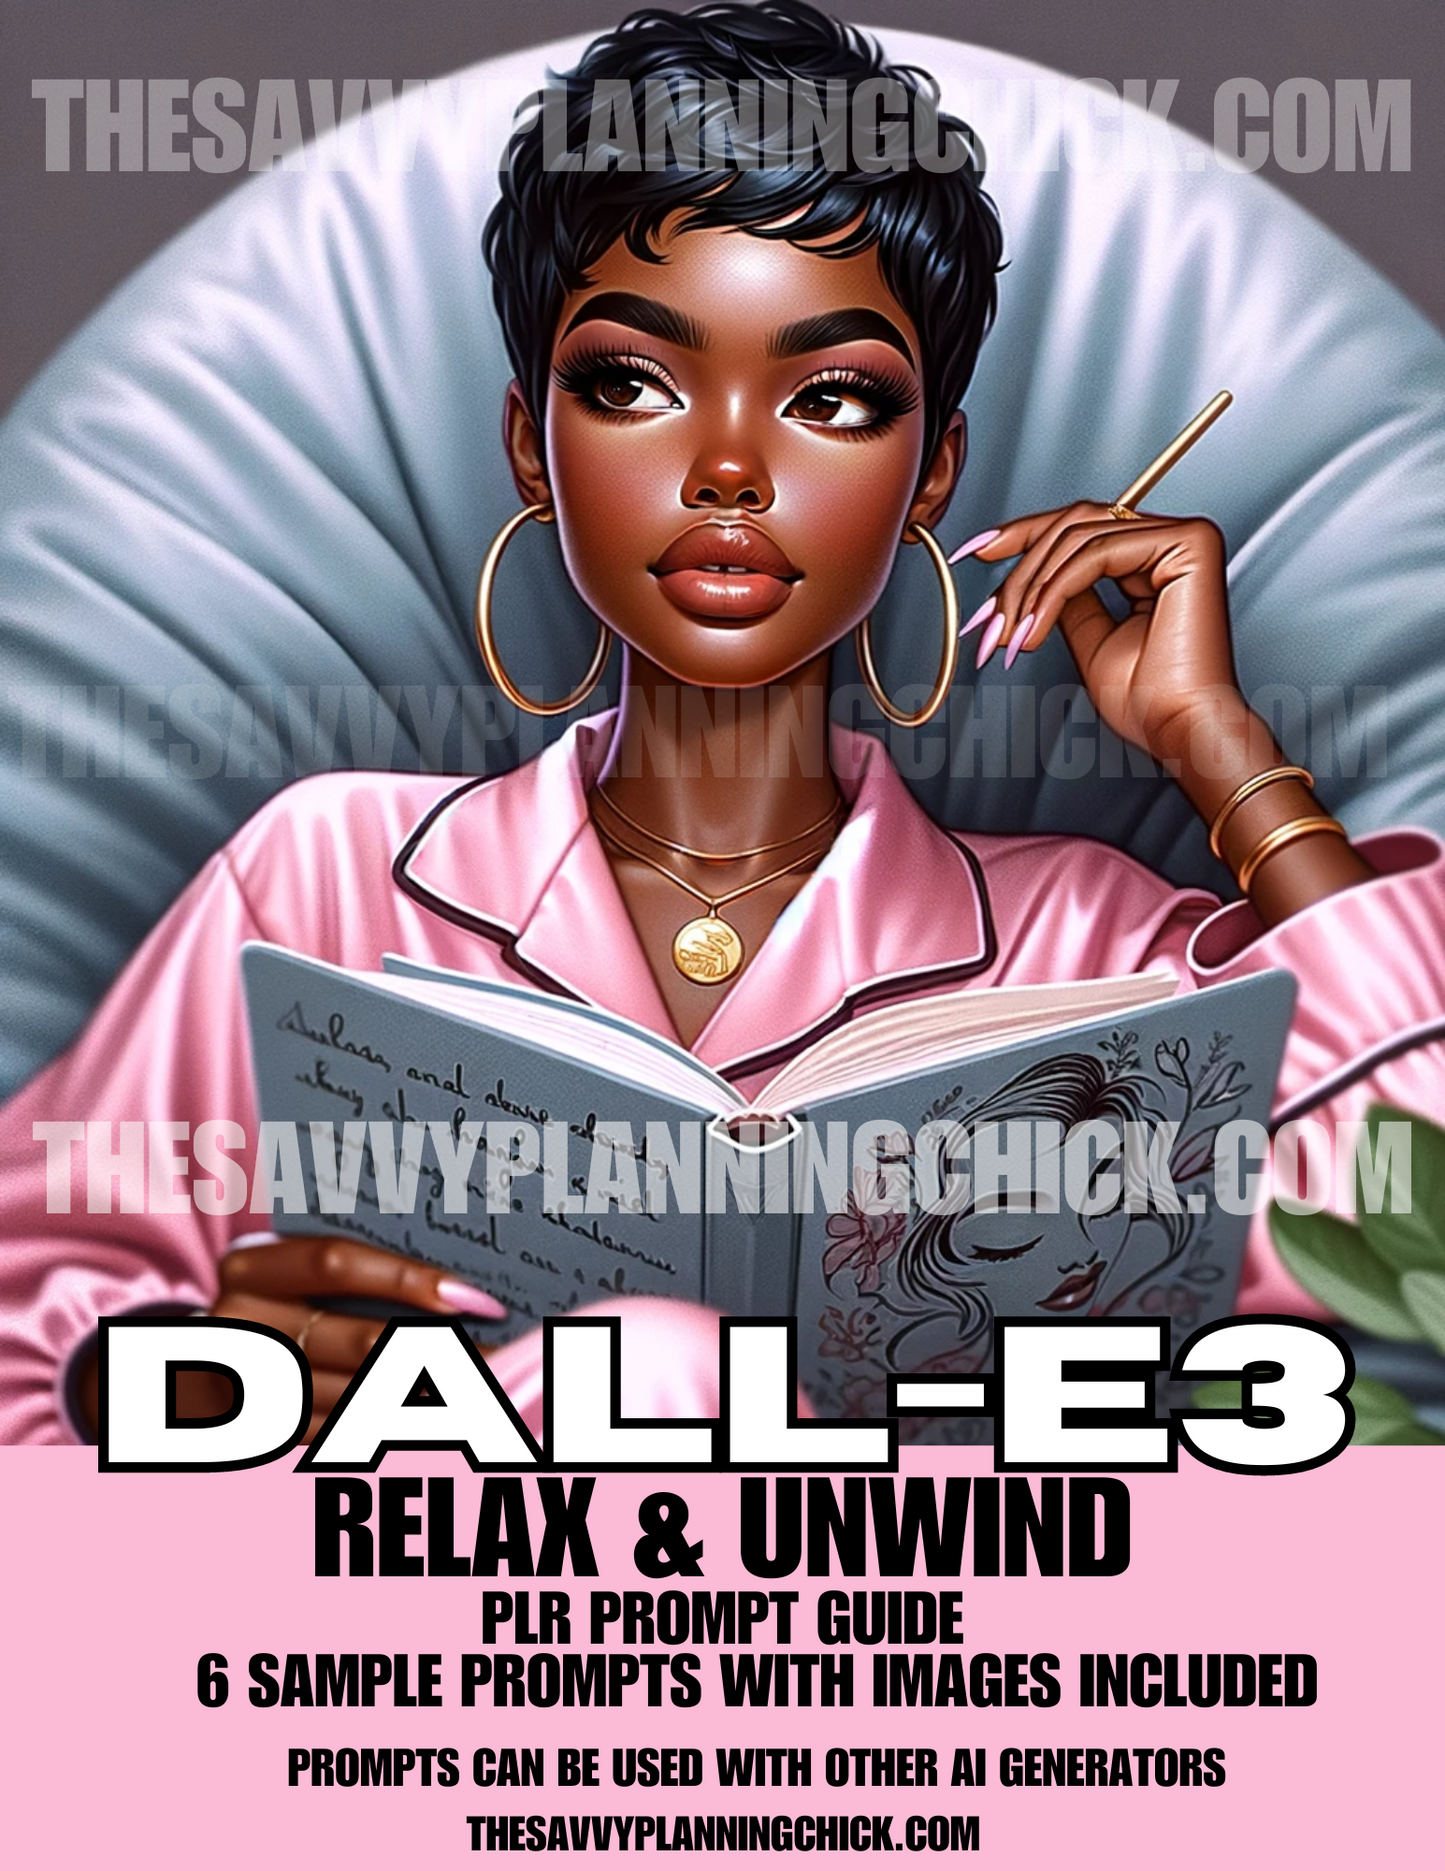 RELAX & UNWIND DALLE PROMPT GUIDE